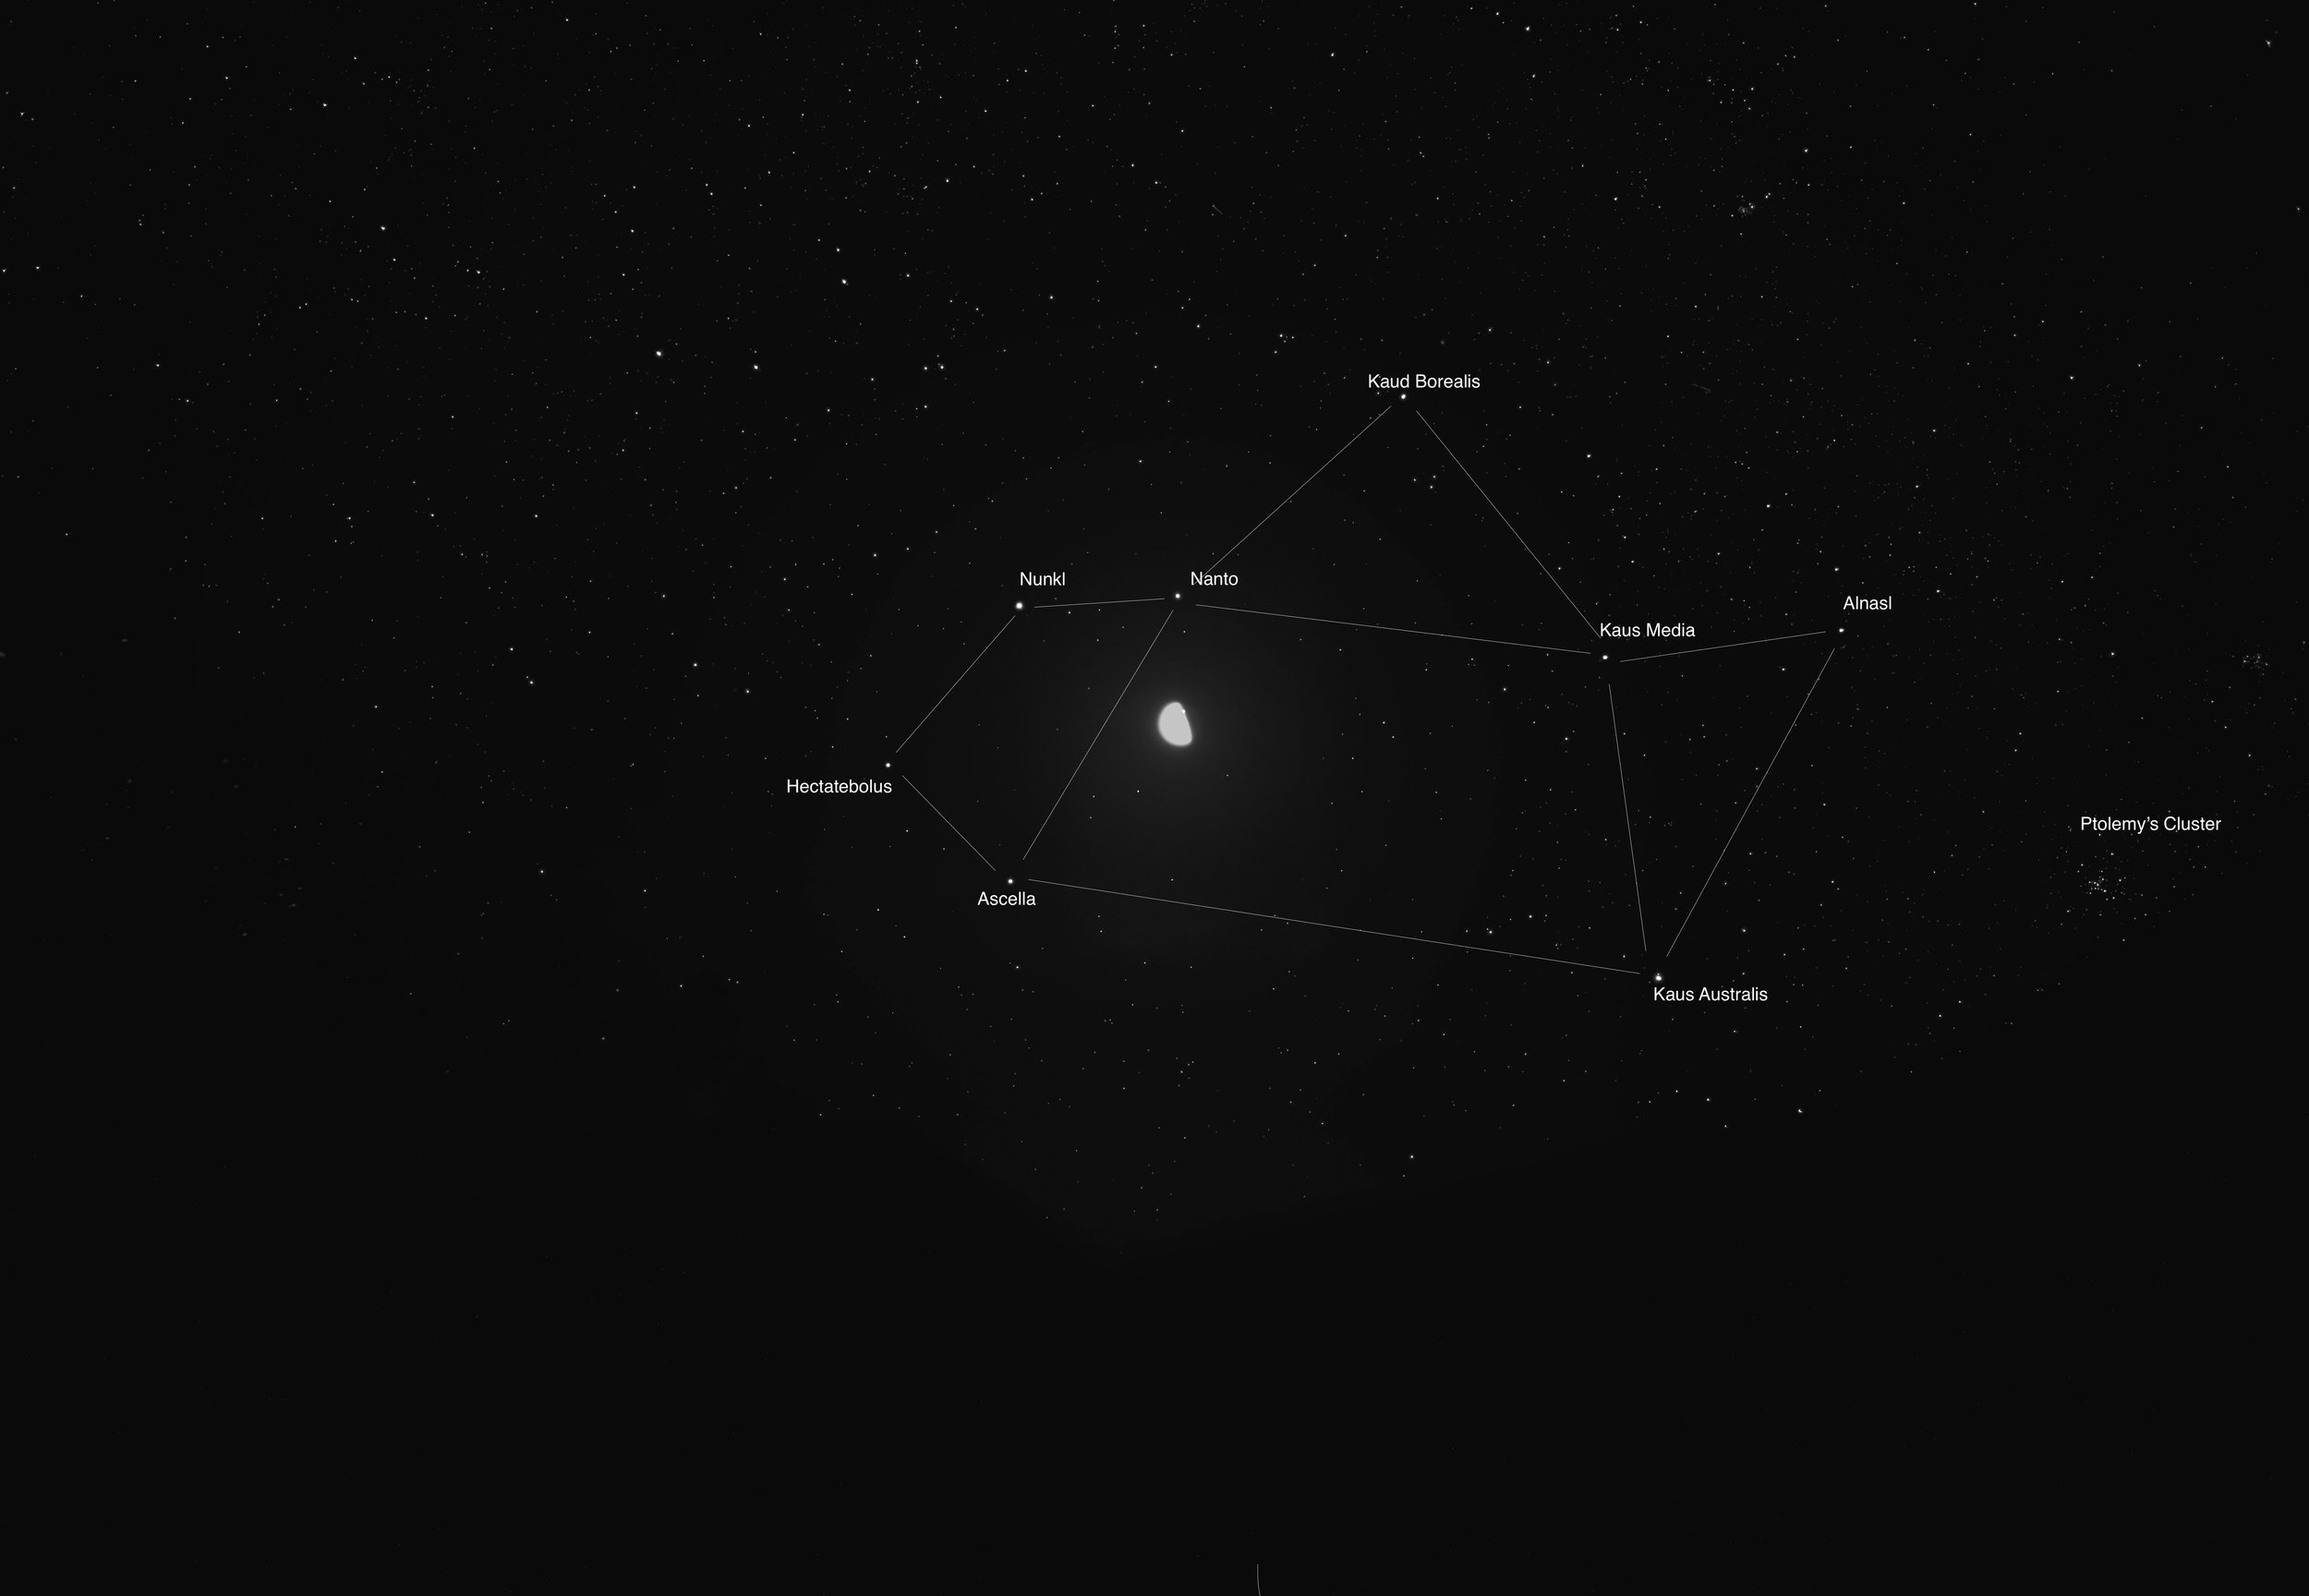 The moon in the Teapot Asterism, annotated